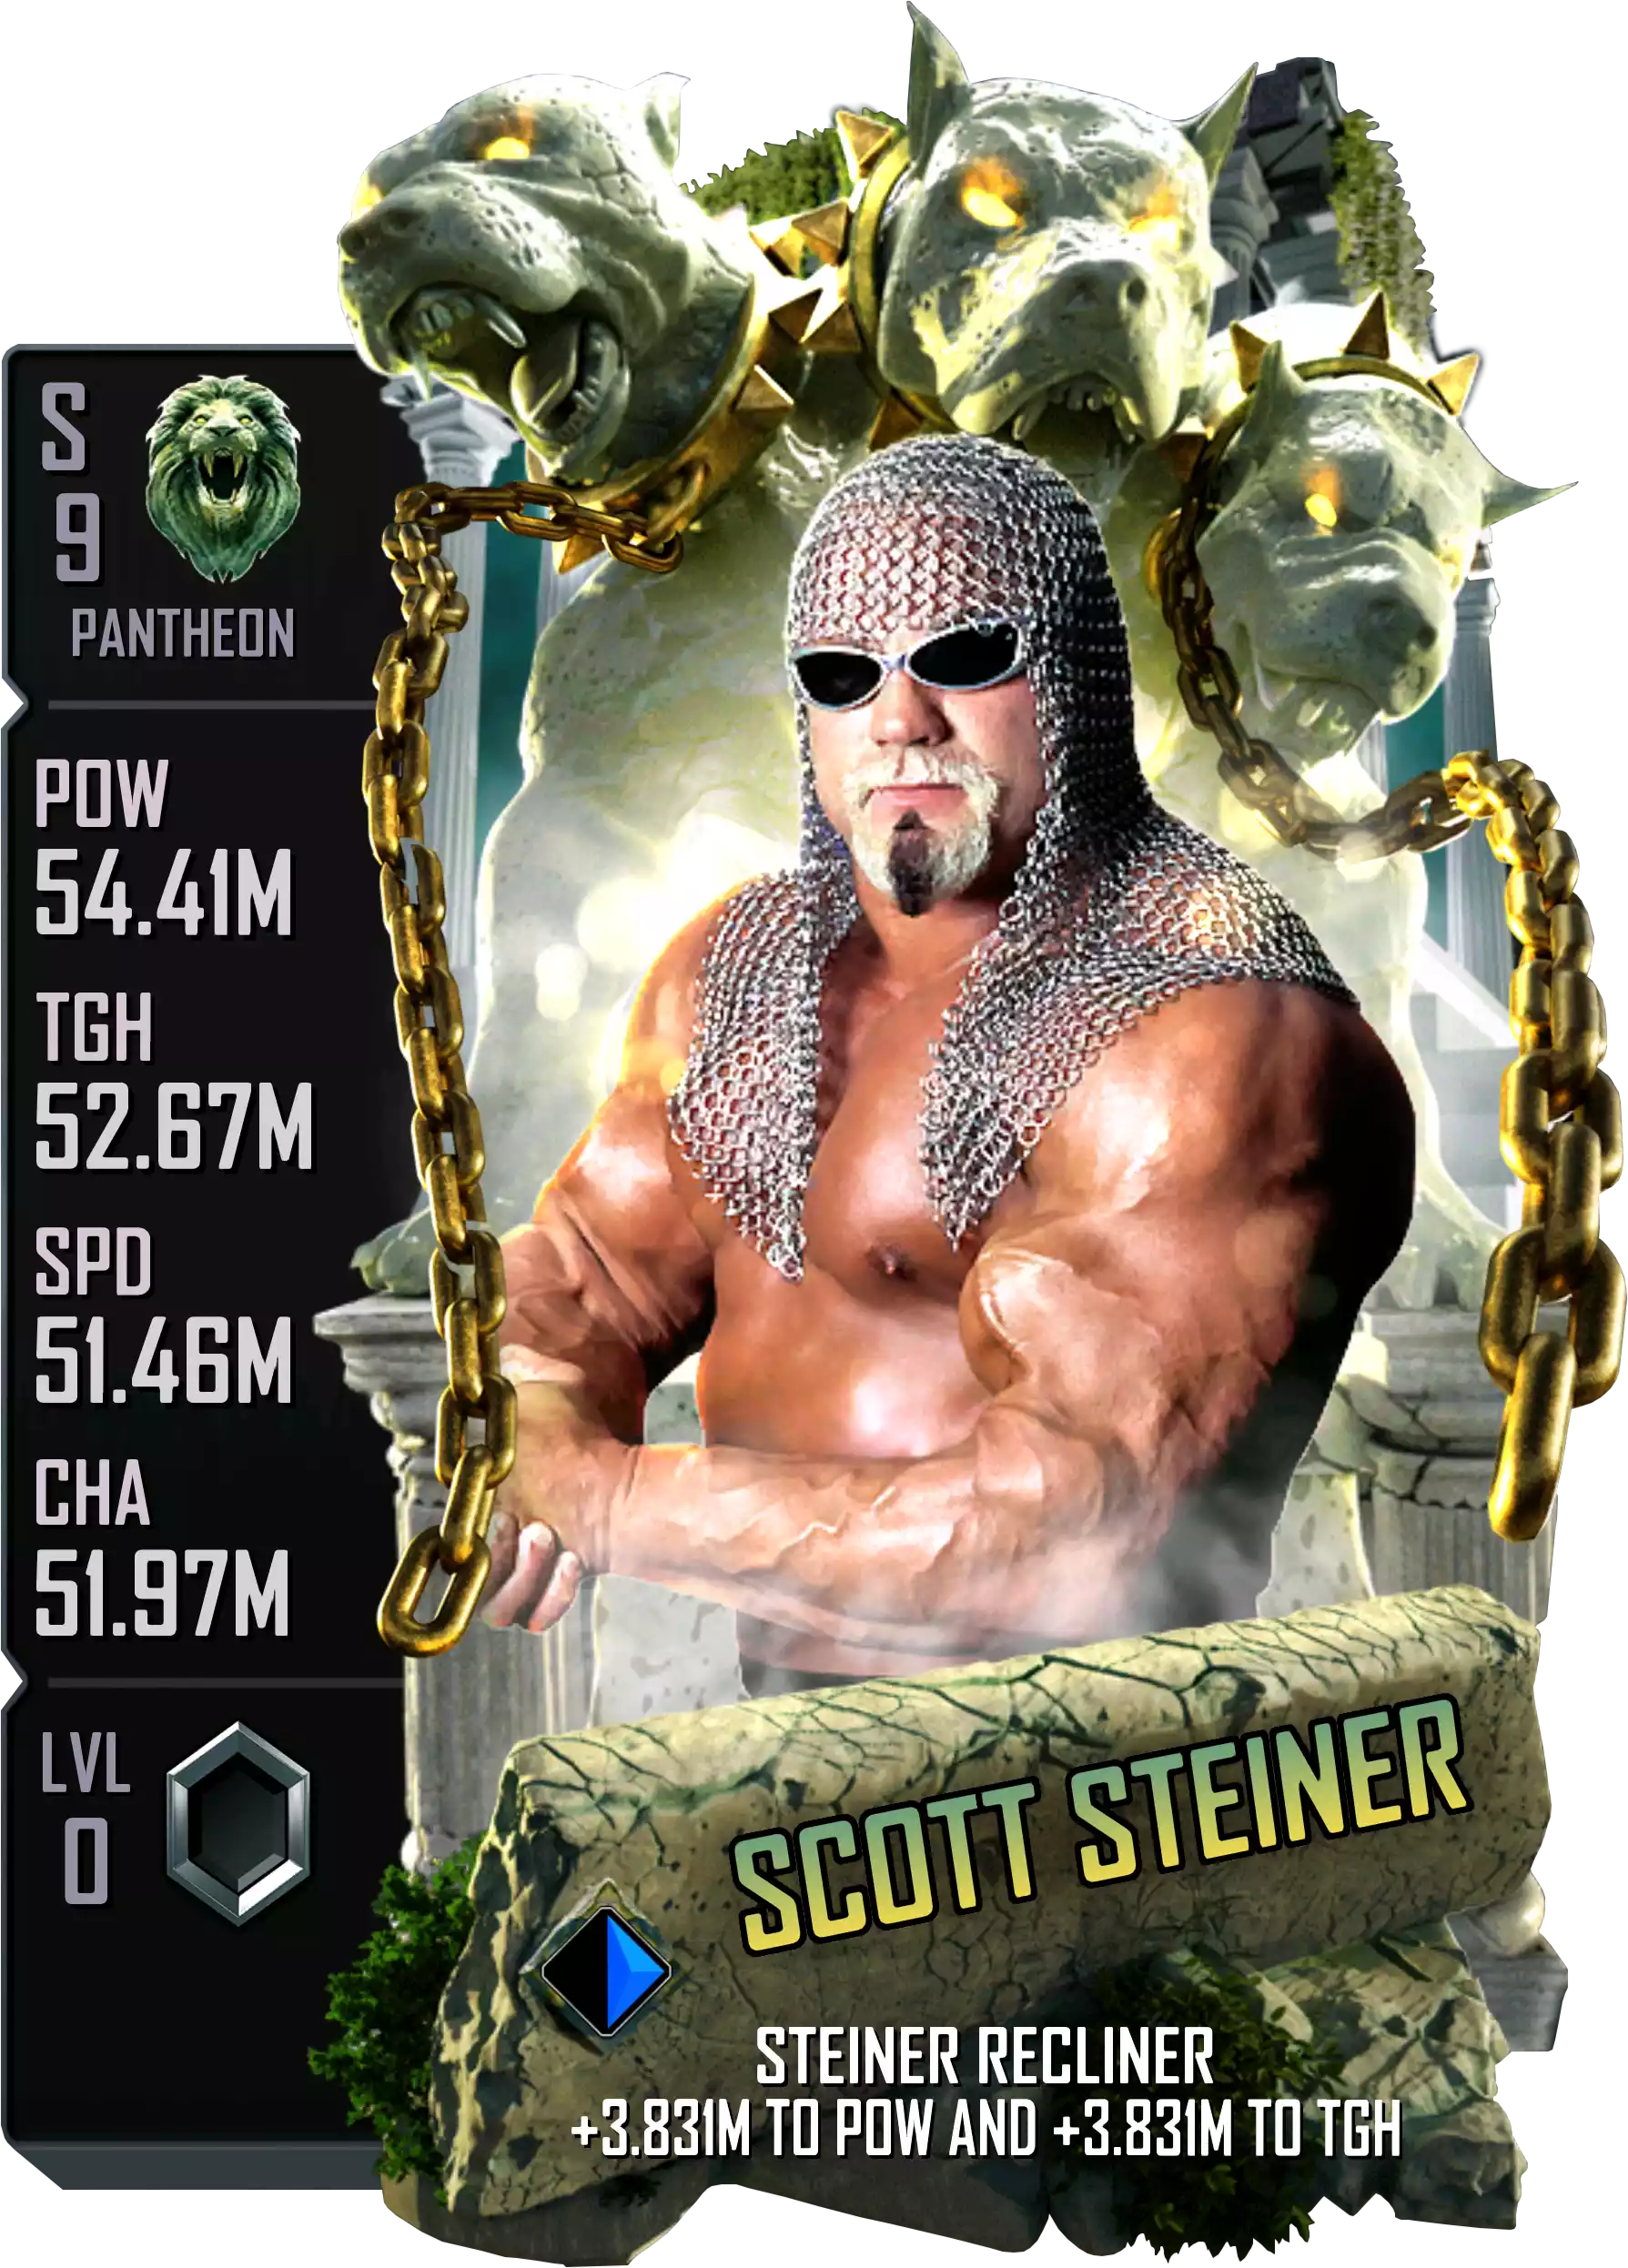 Pantheon, Scott Steiner, Fusion Card from WWE Supercard